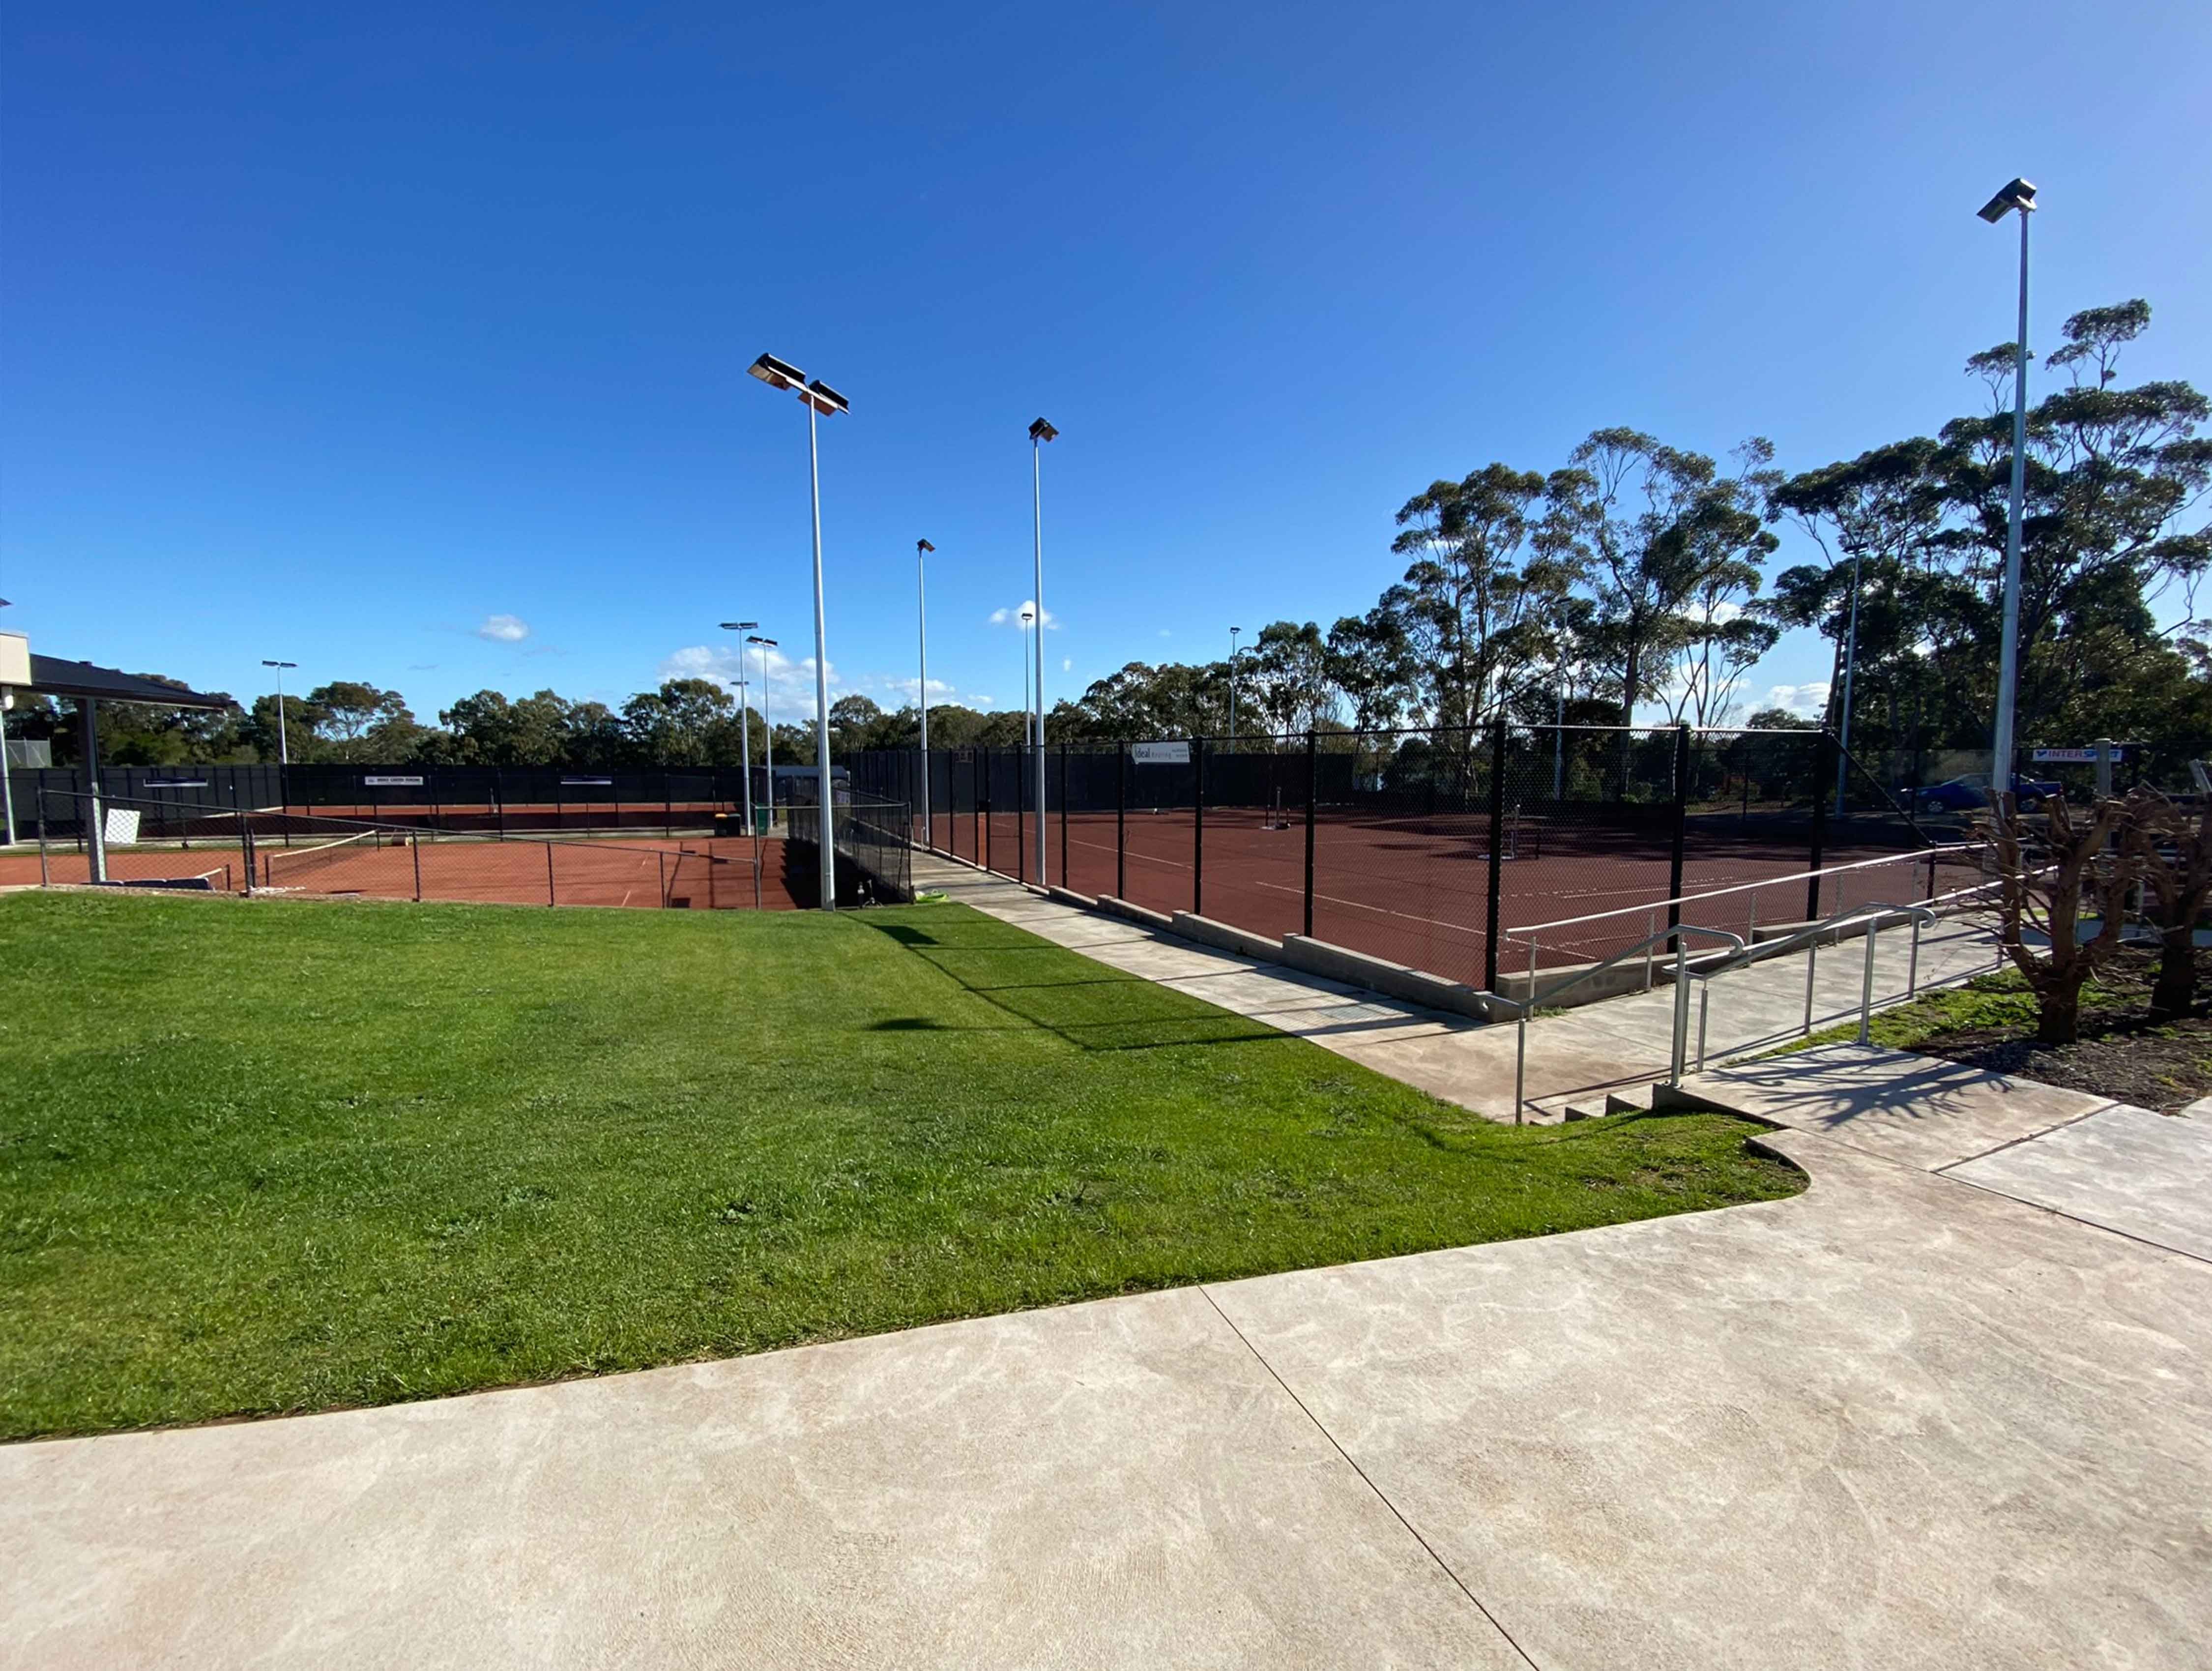 Panoramic view of an outdoor red porous tennis court surface with white line markings